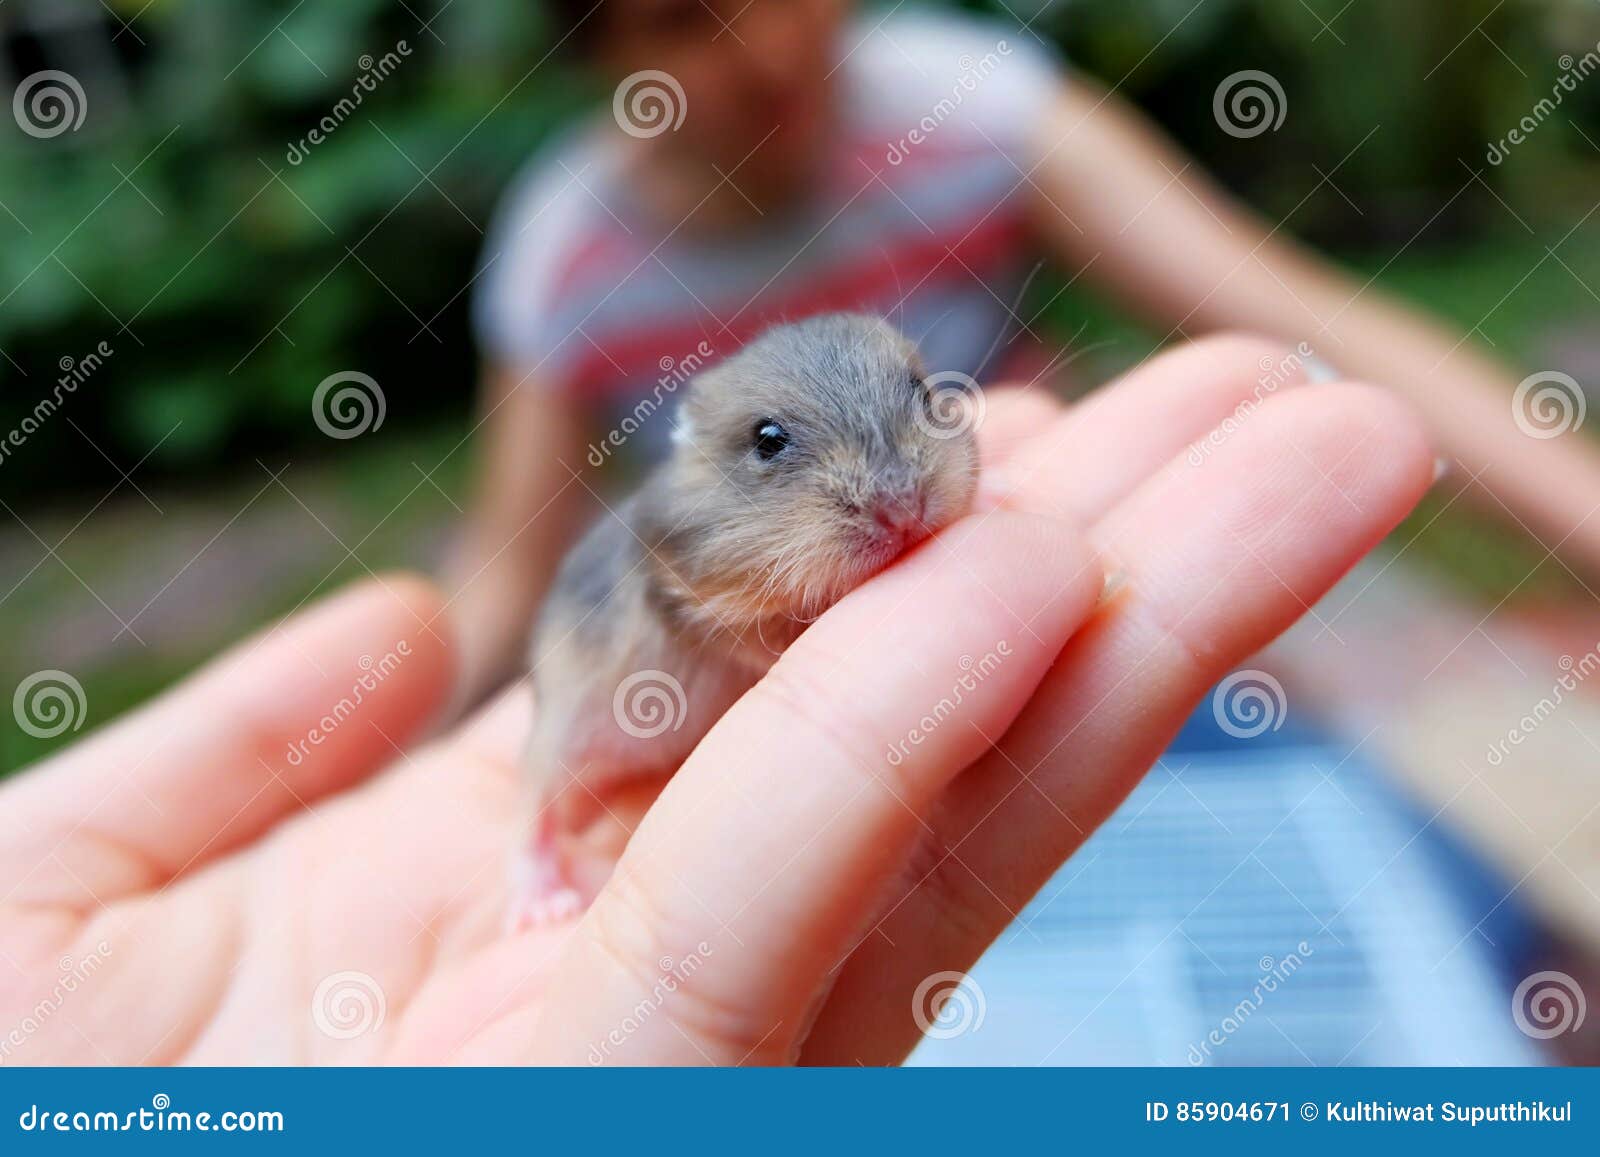 8 Winter White Hamster Photos Free Royalty Free Stock Photos From Dreamstime